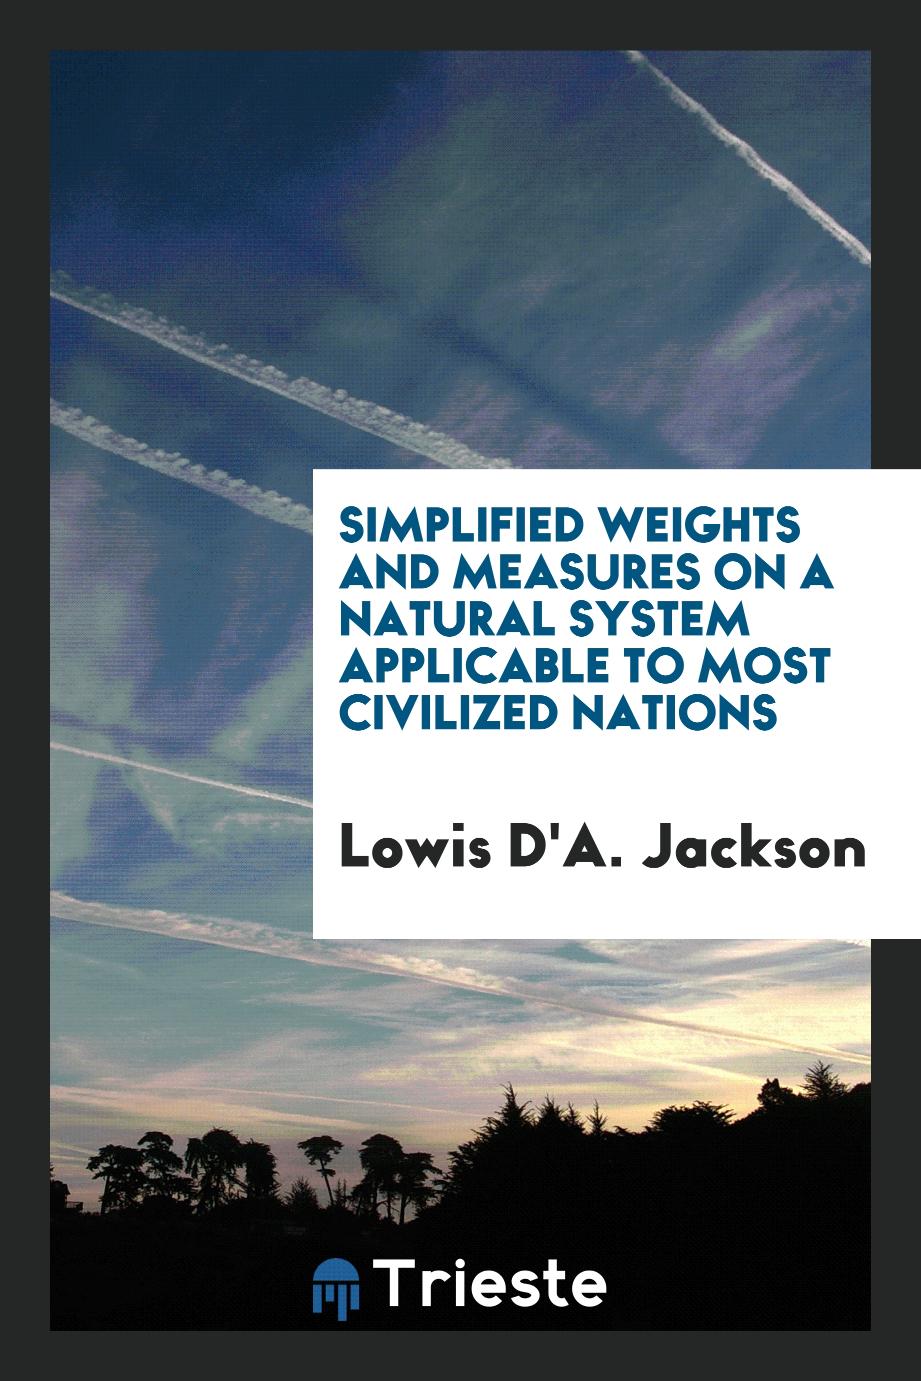 Simplified weights and measures on a natural system applicable to most civilized nations